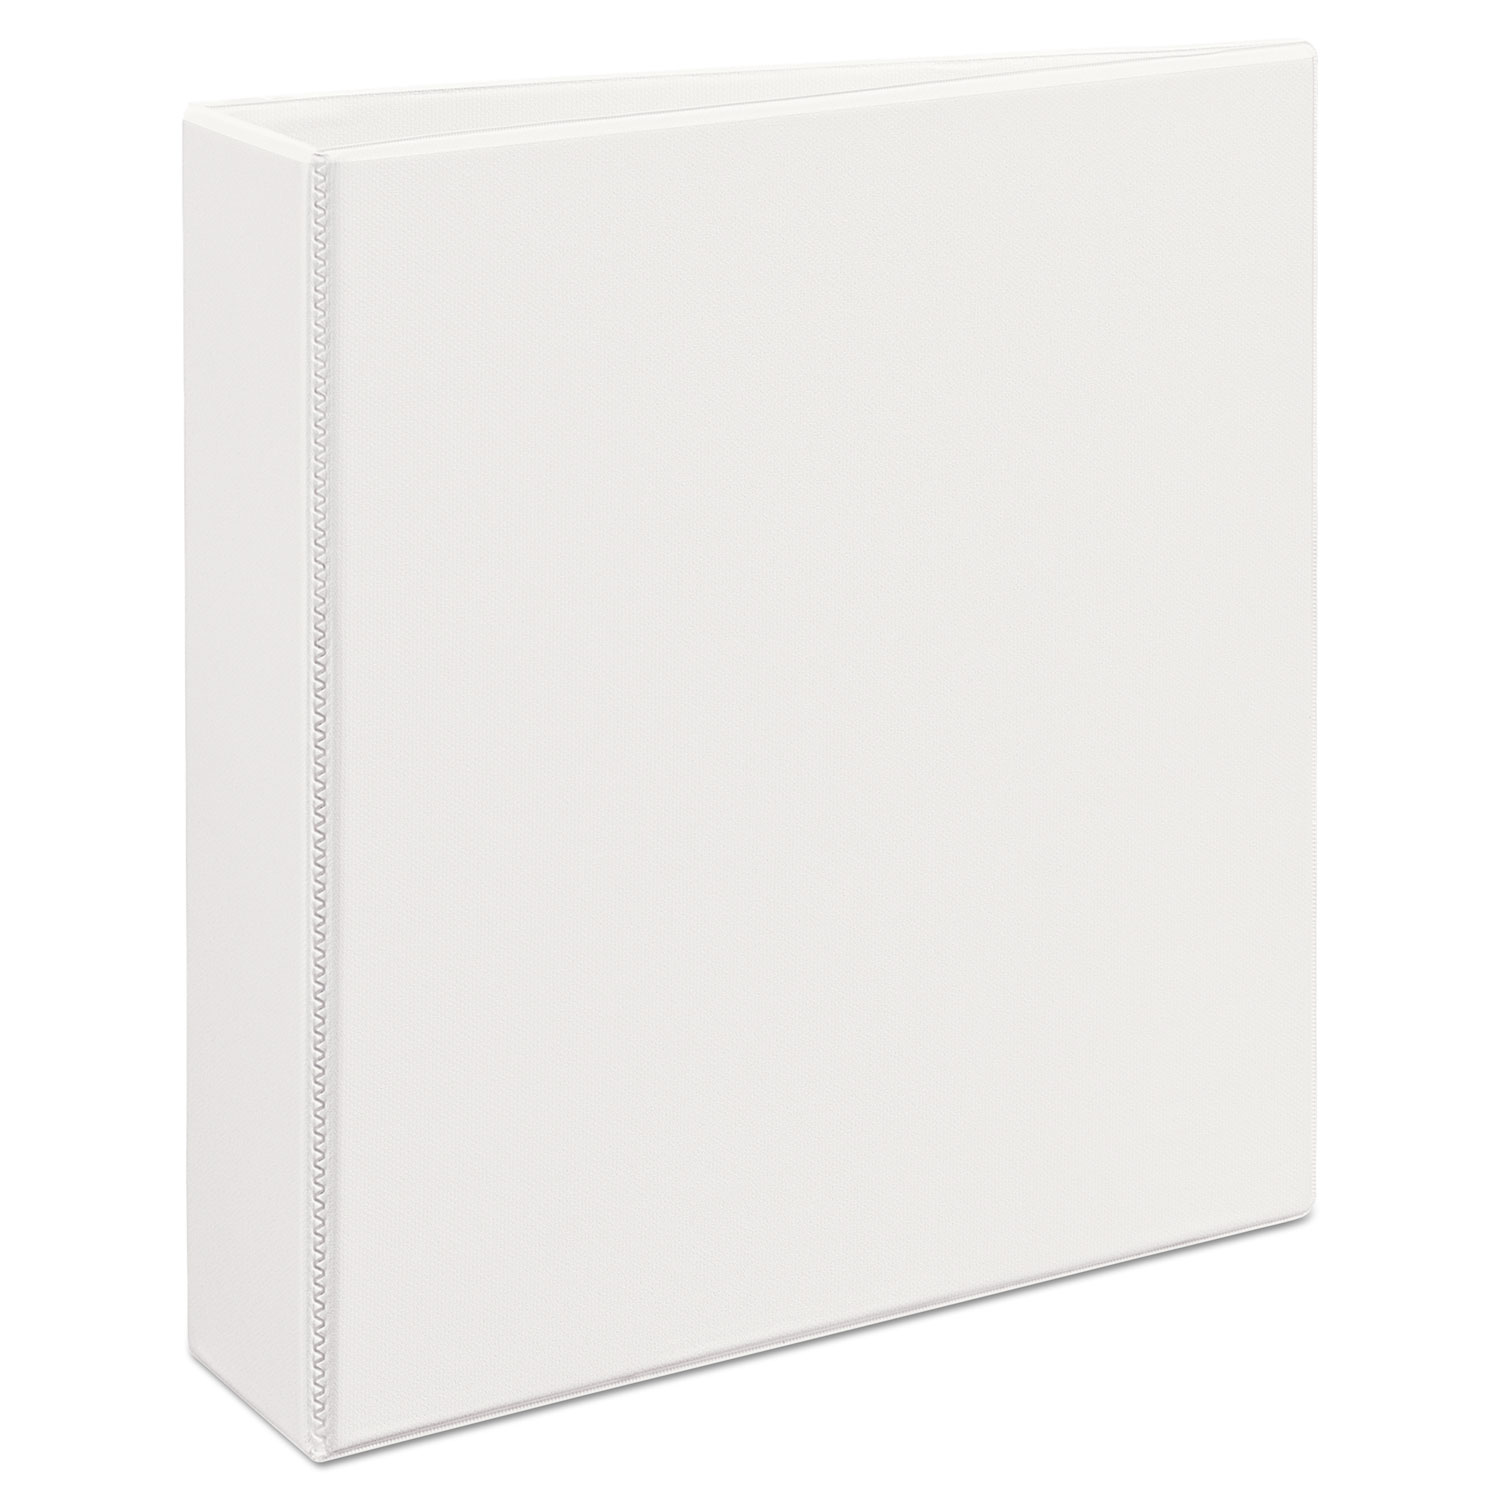 2 Heavy Duty View Ring Binder with One Touch EZD Rings White - Avery